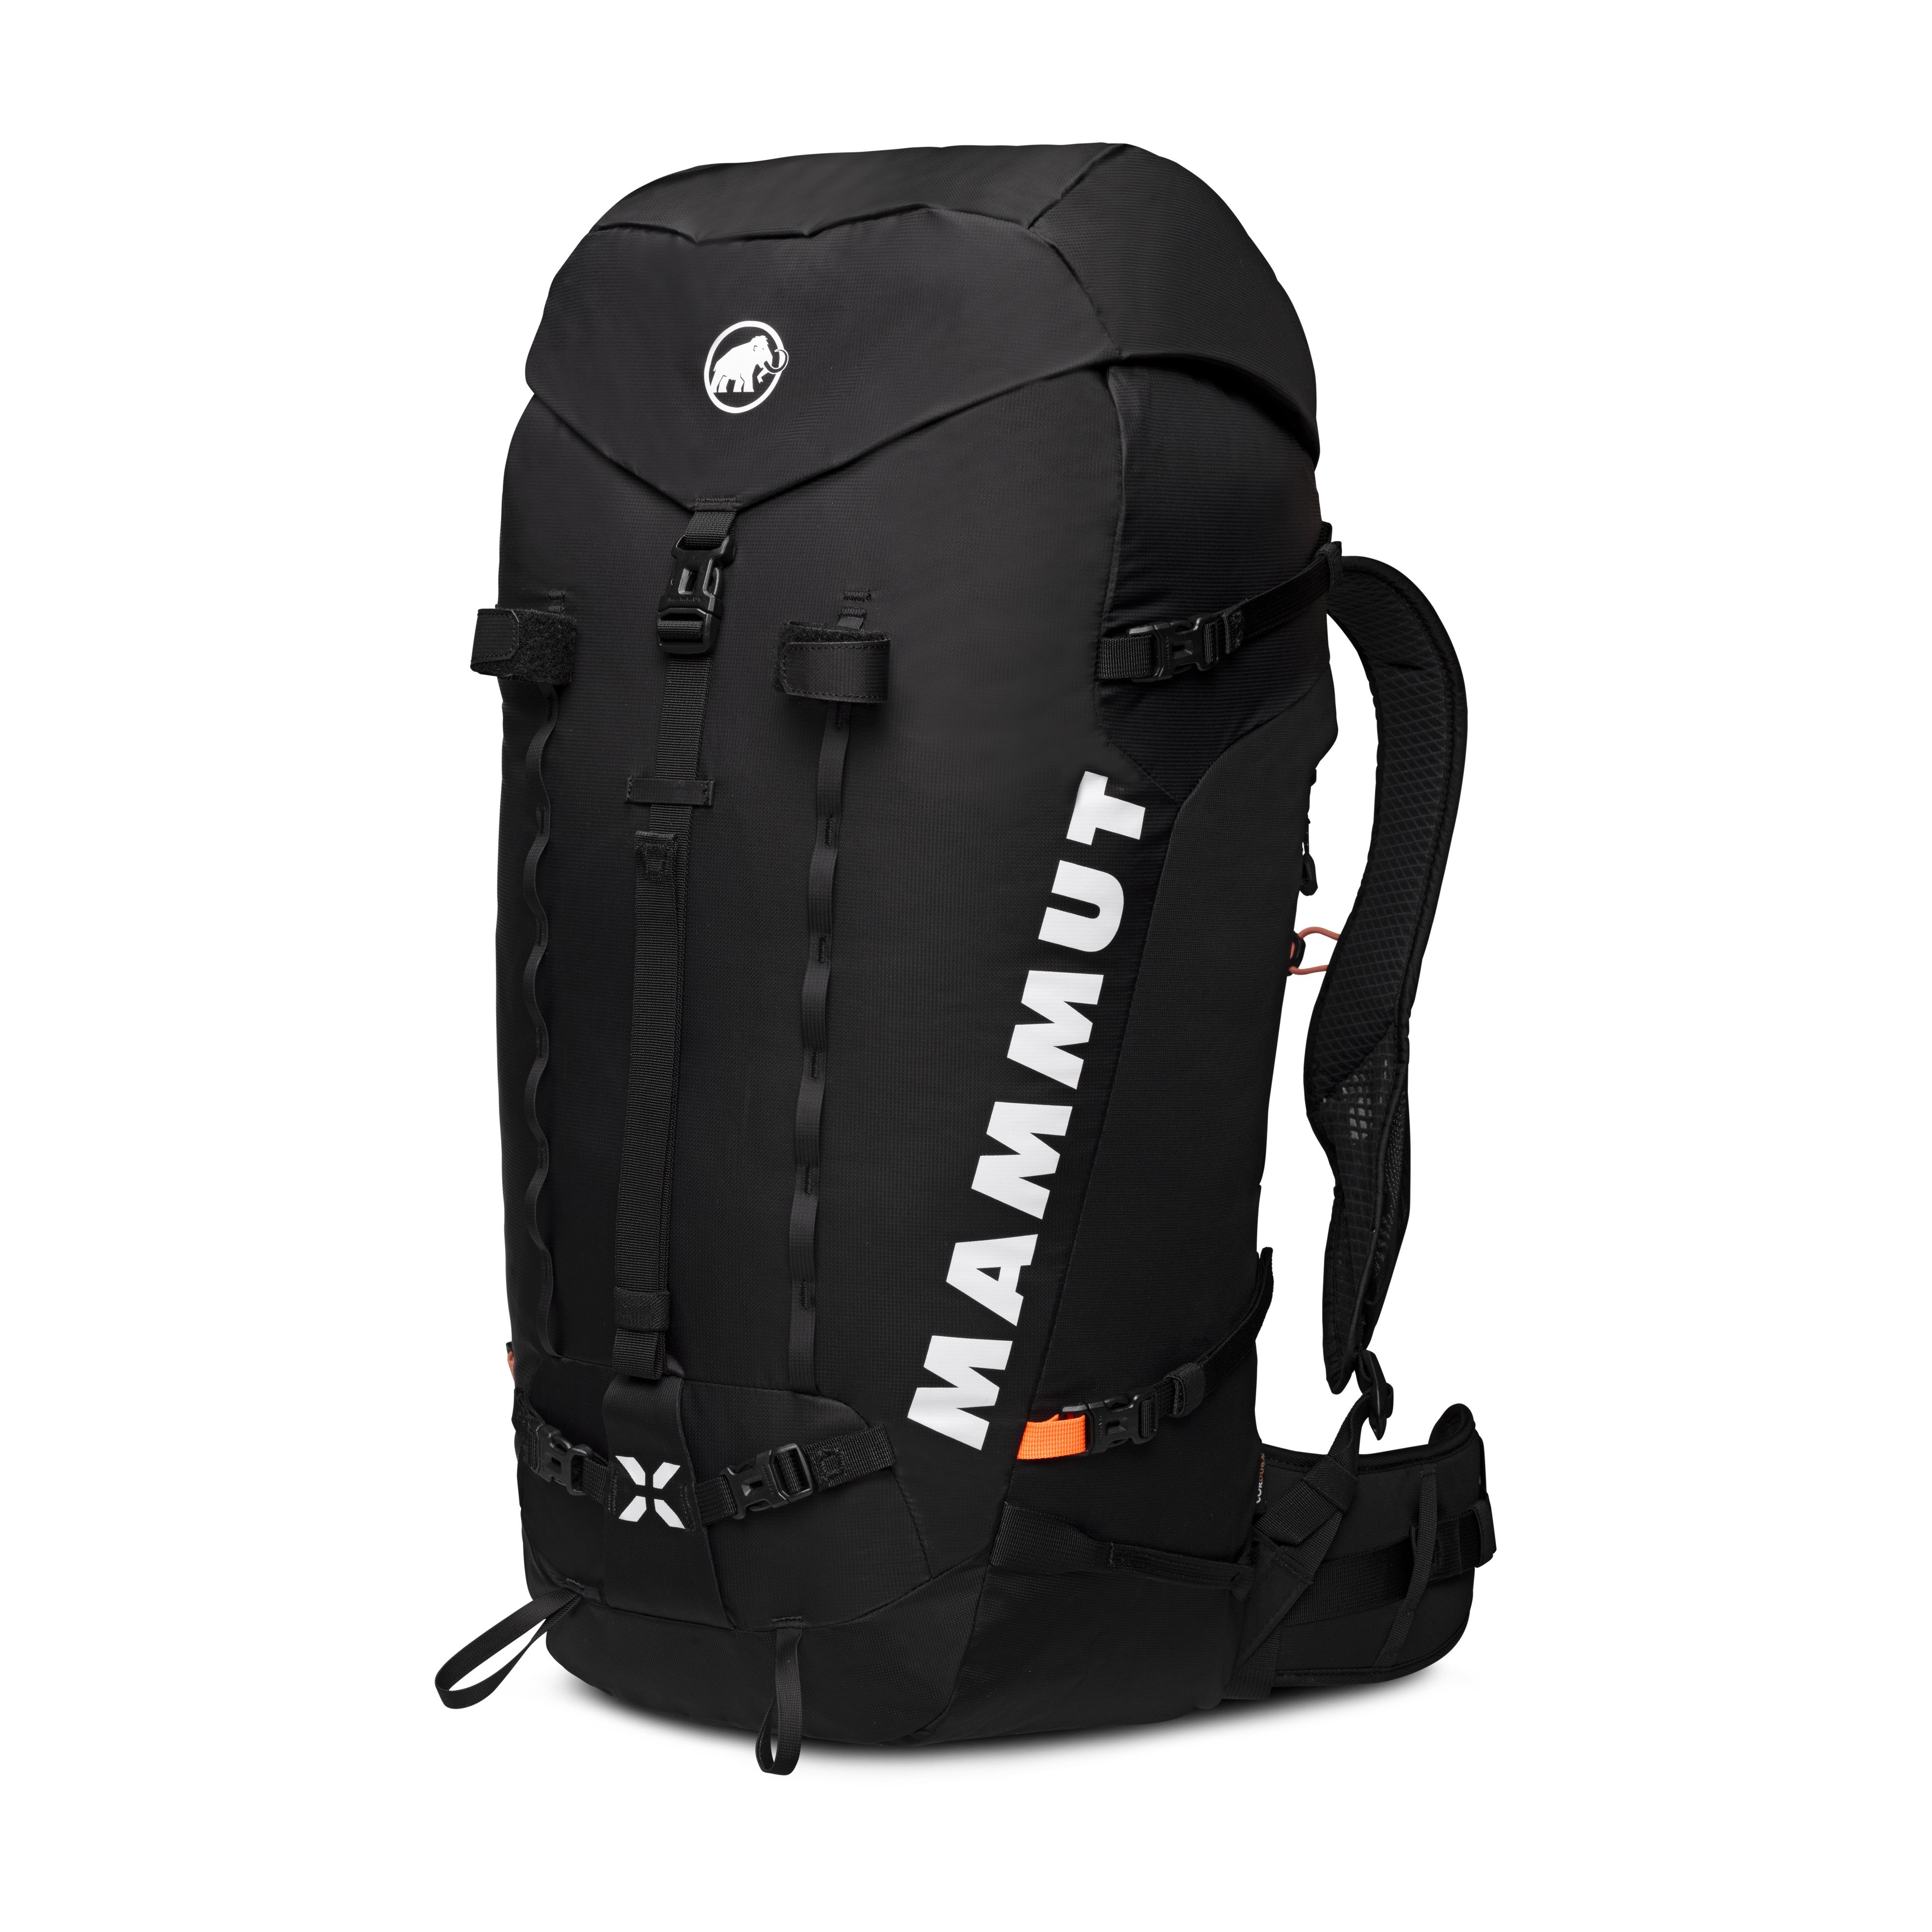 Trion Nordwand 38 - black, 38 L product image